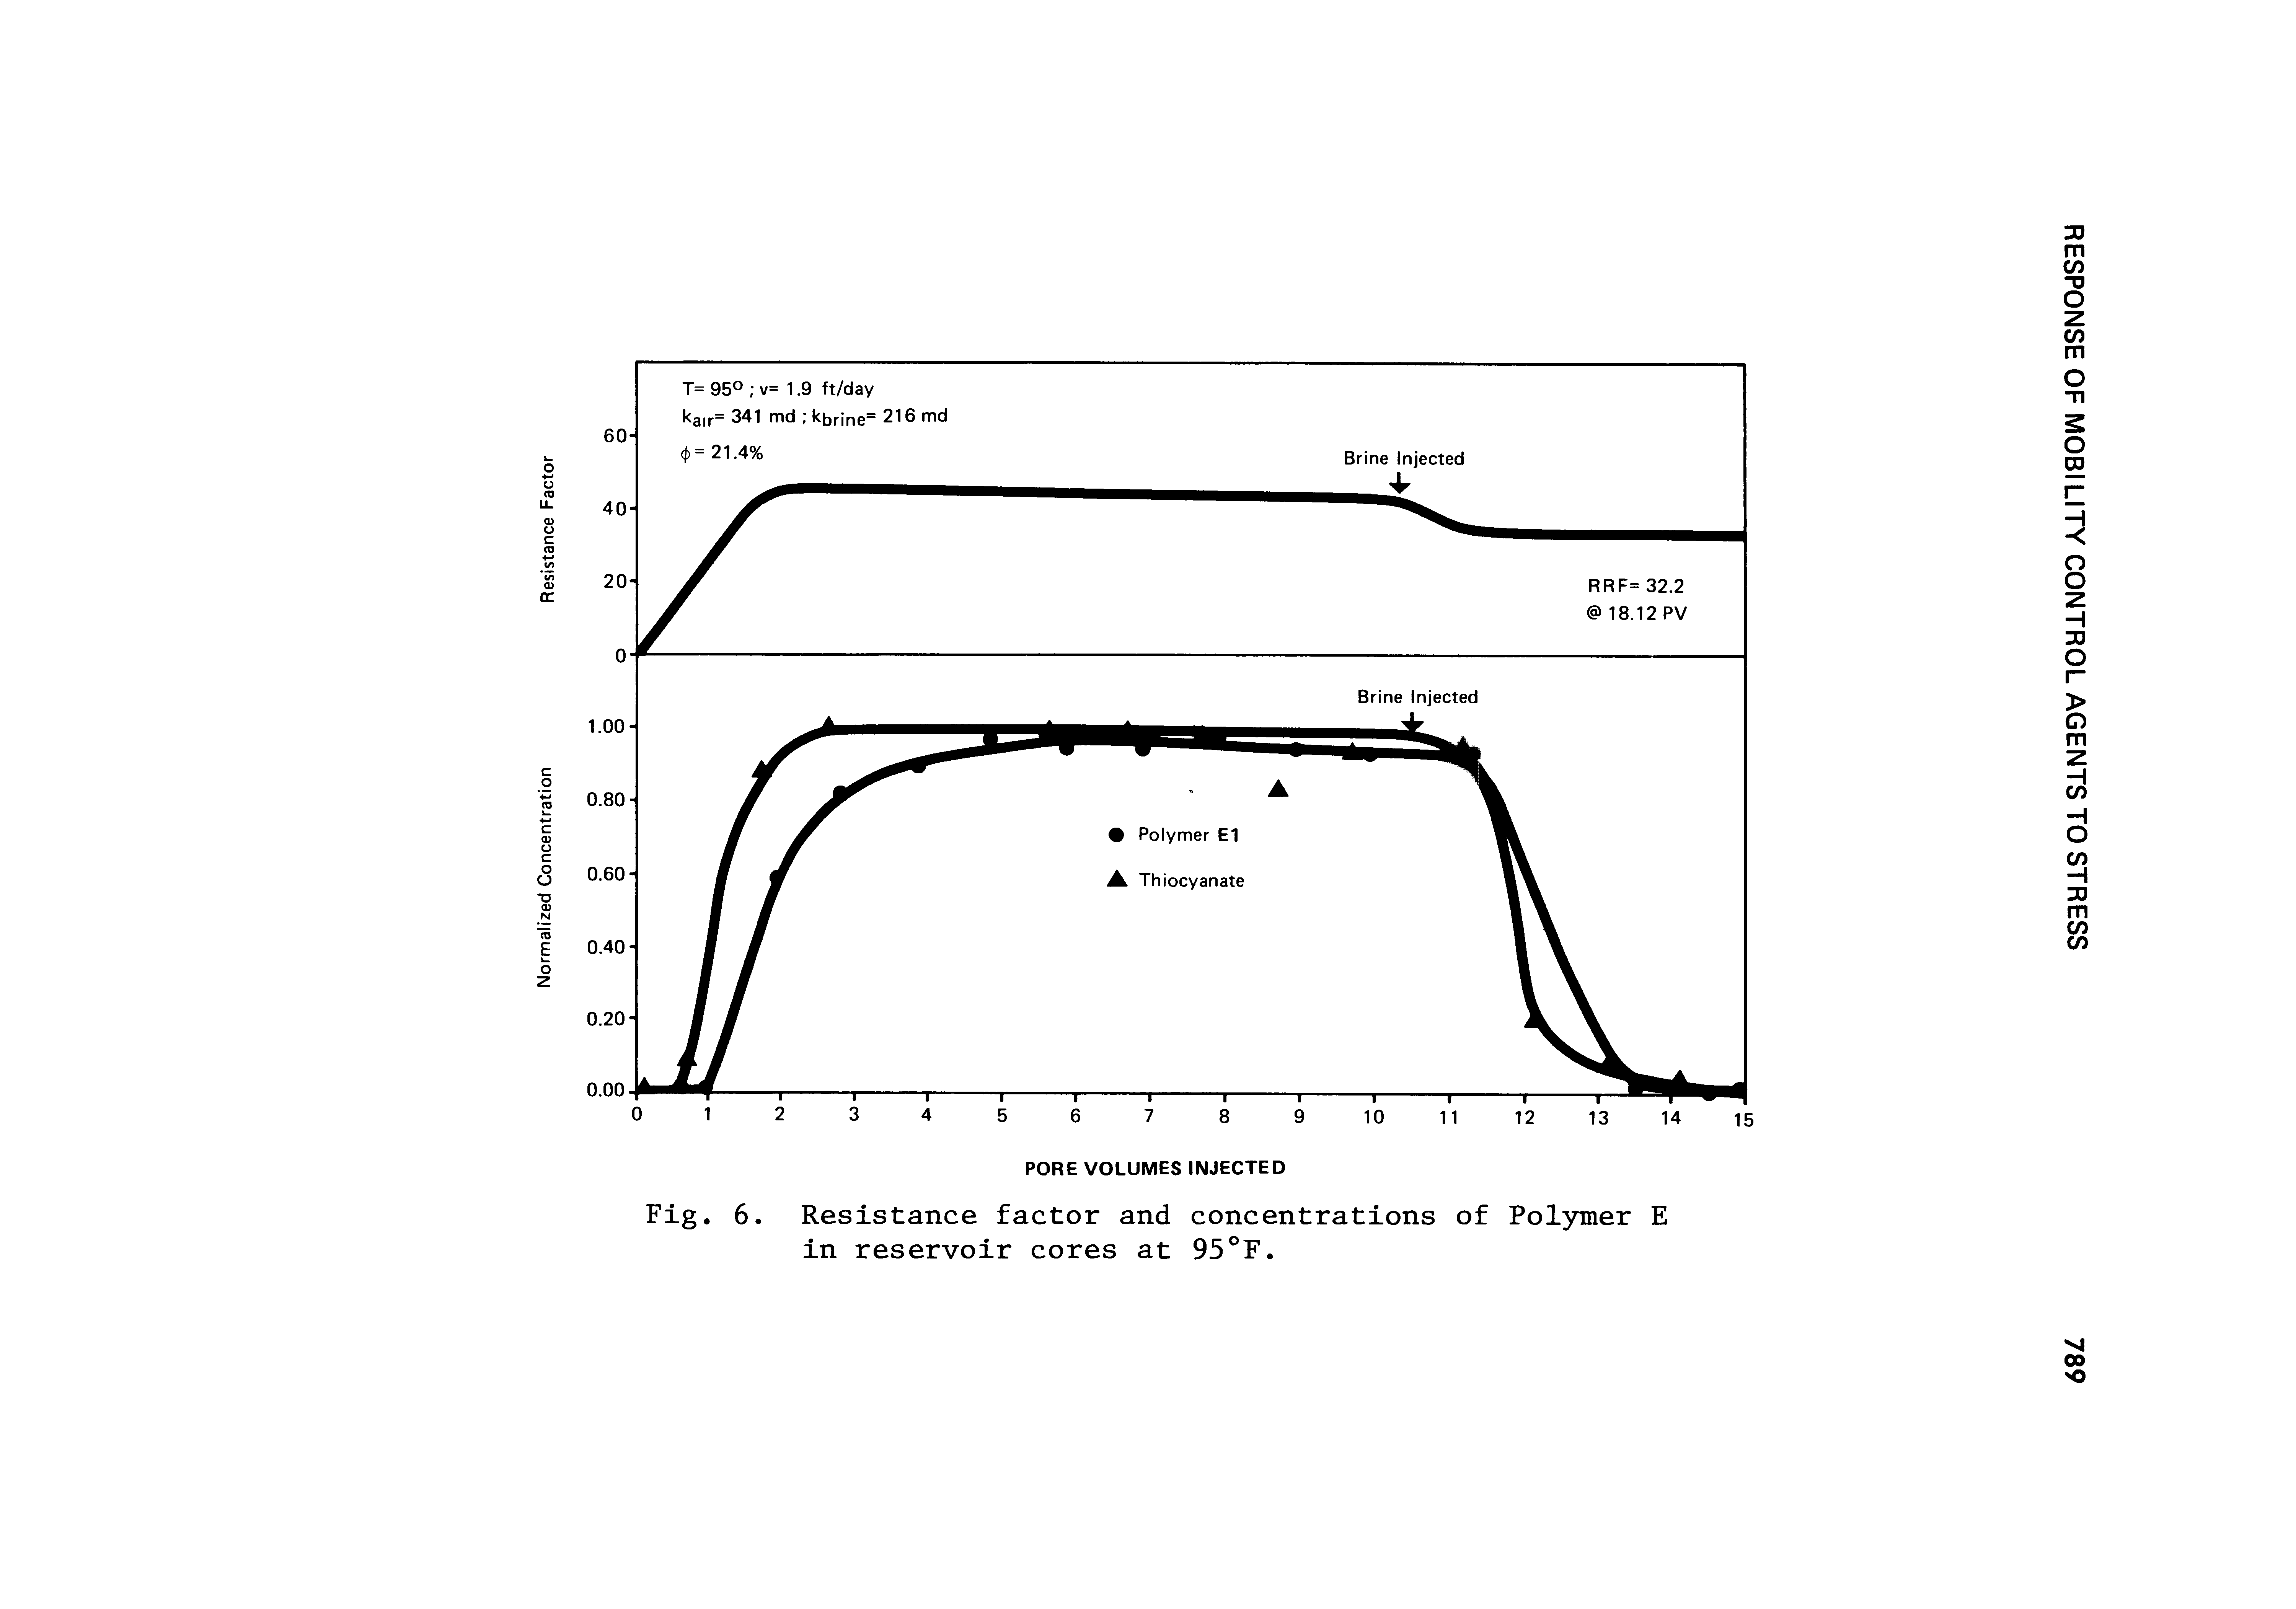 Fig. 6. Resistance factor and concentrations of Polymer E in reservoir cores at 95°F.